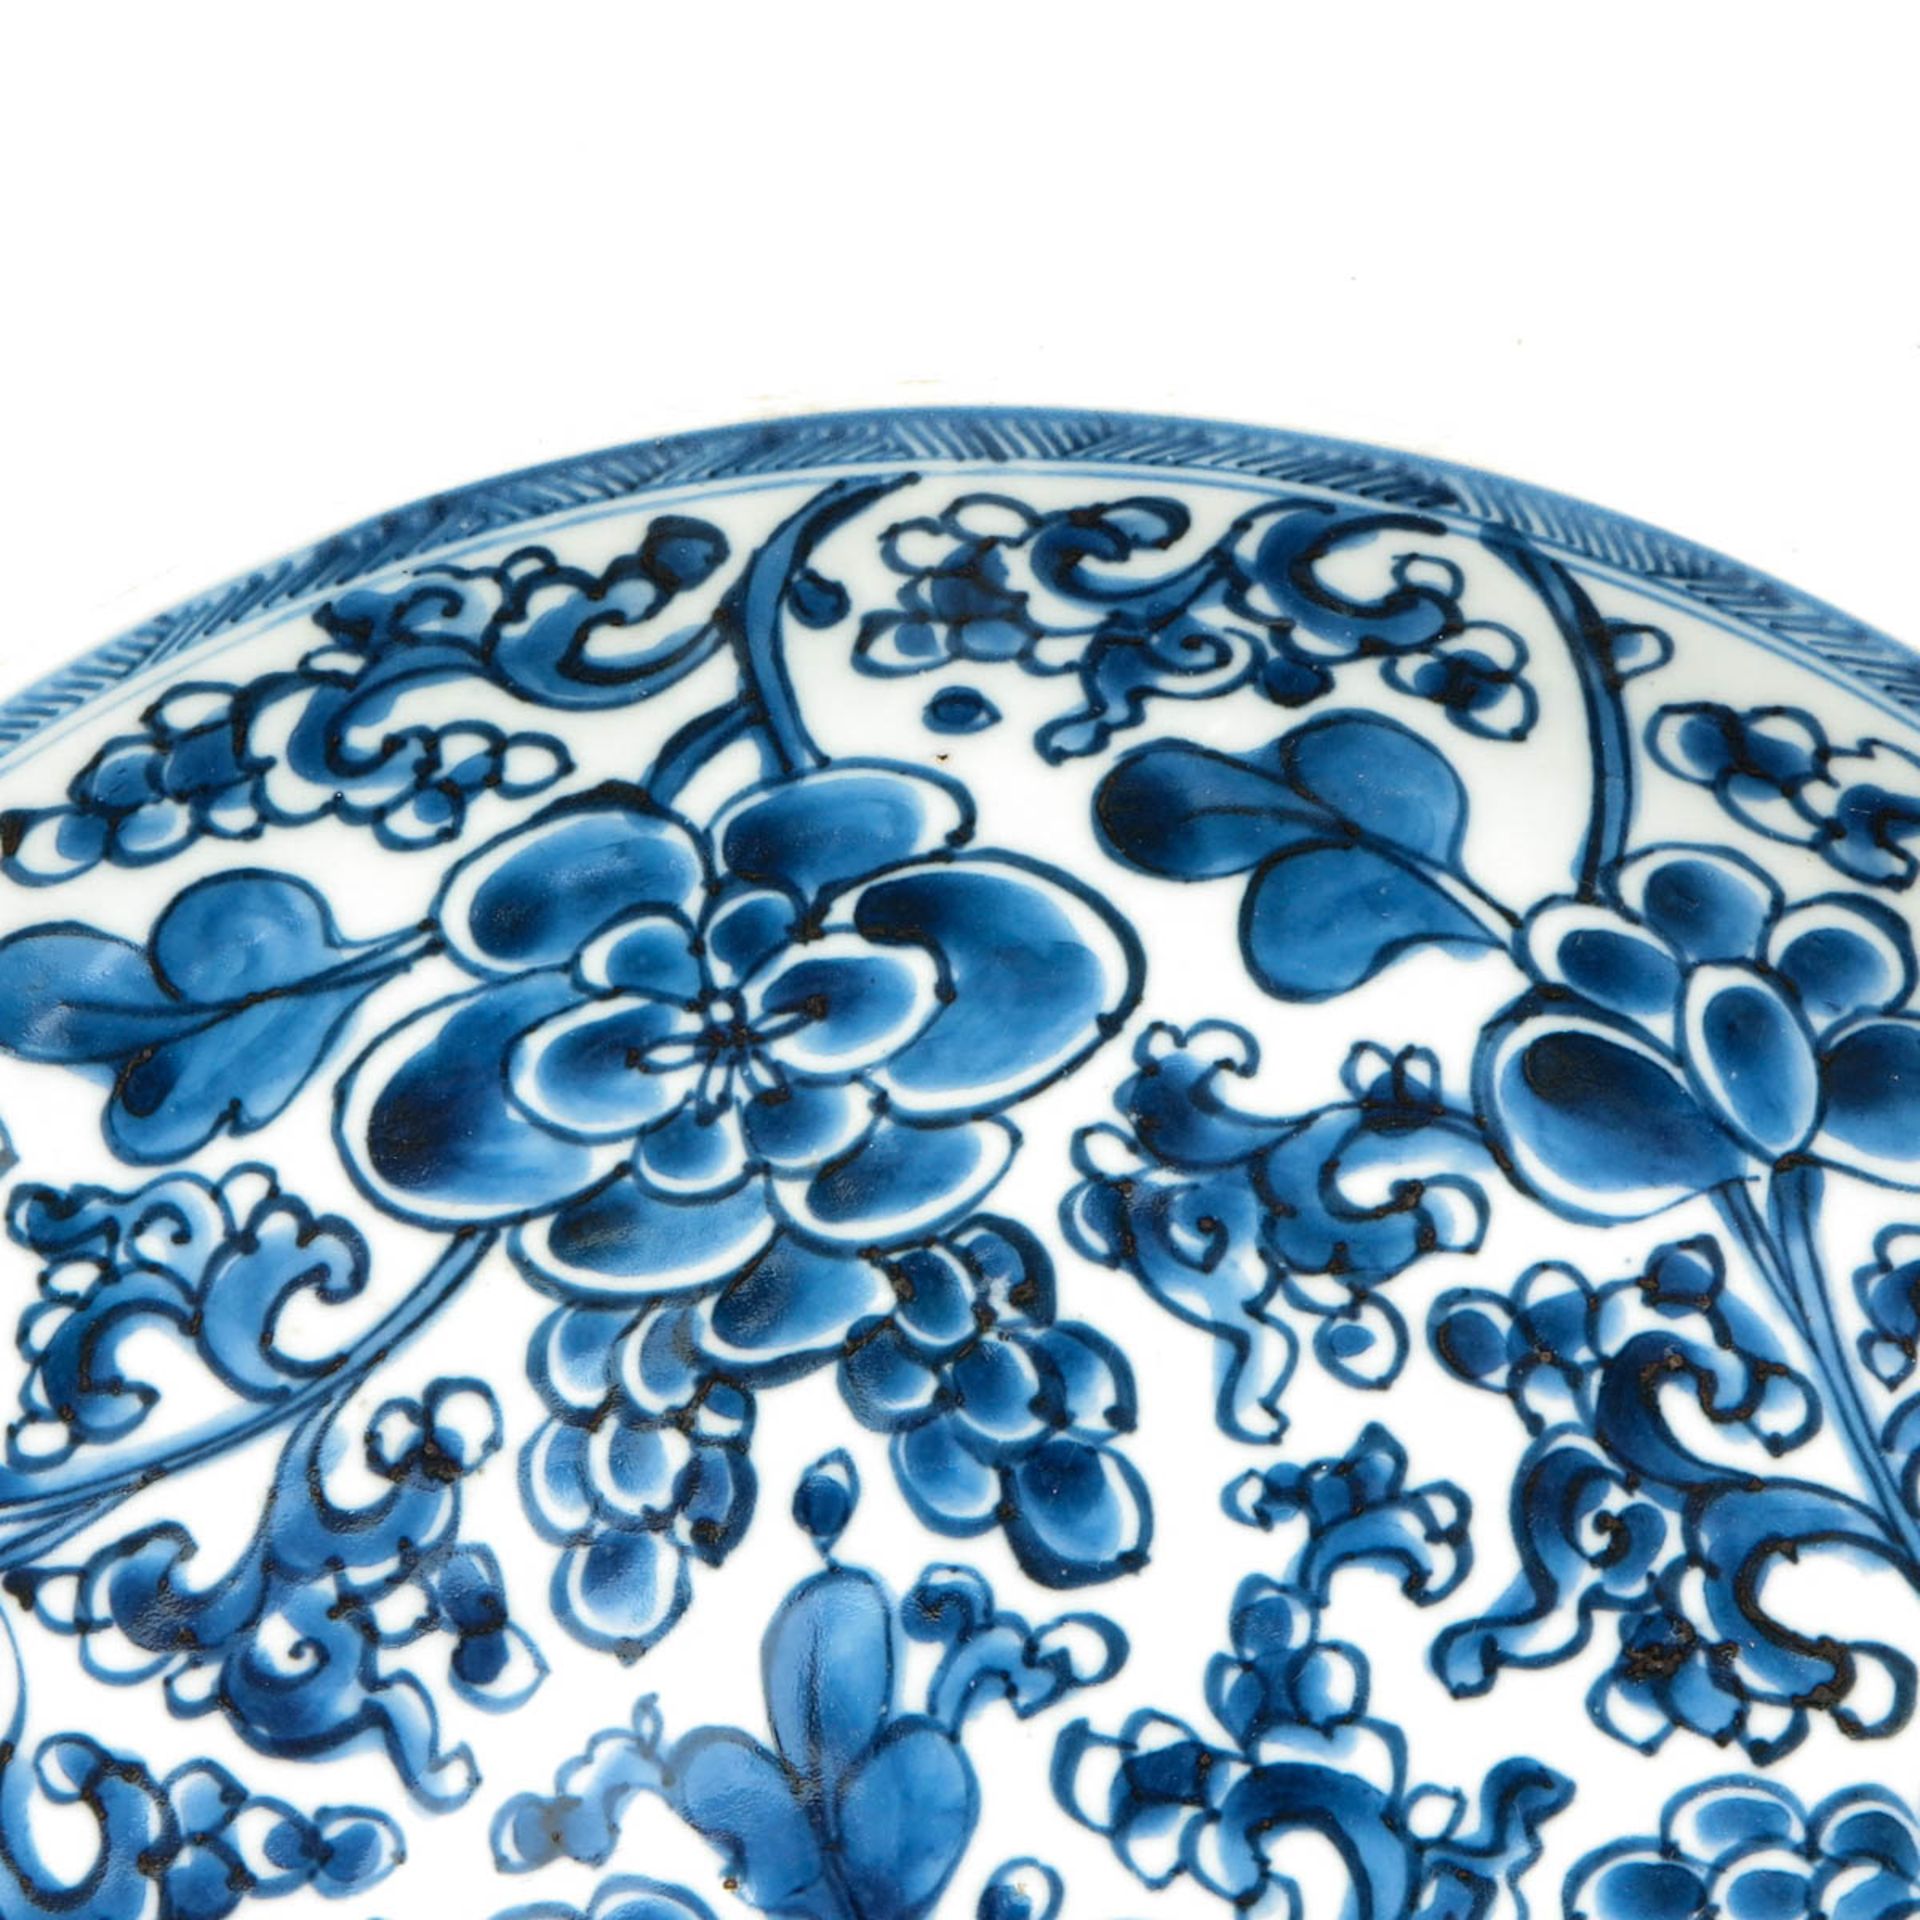 A Blue and White Plate - Image 3 of 7